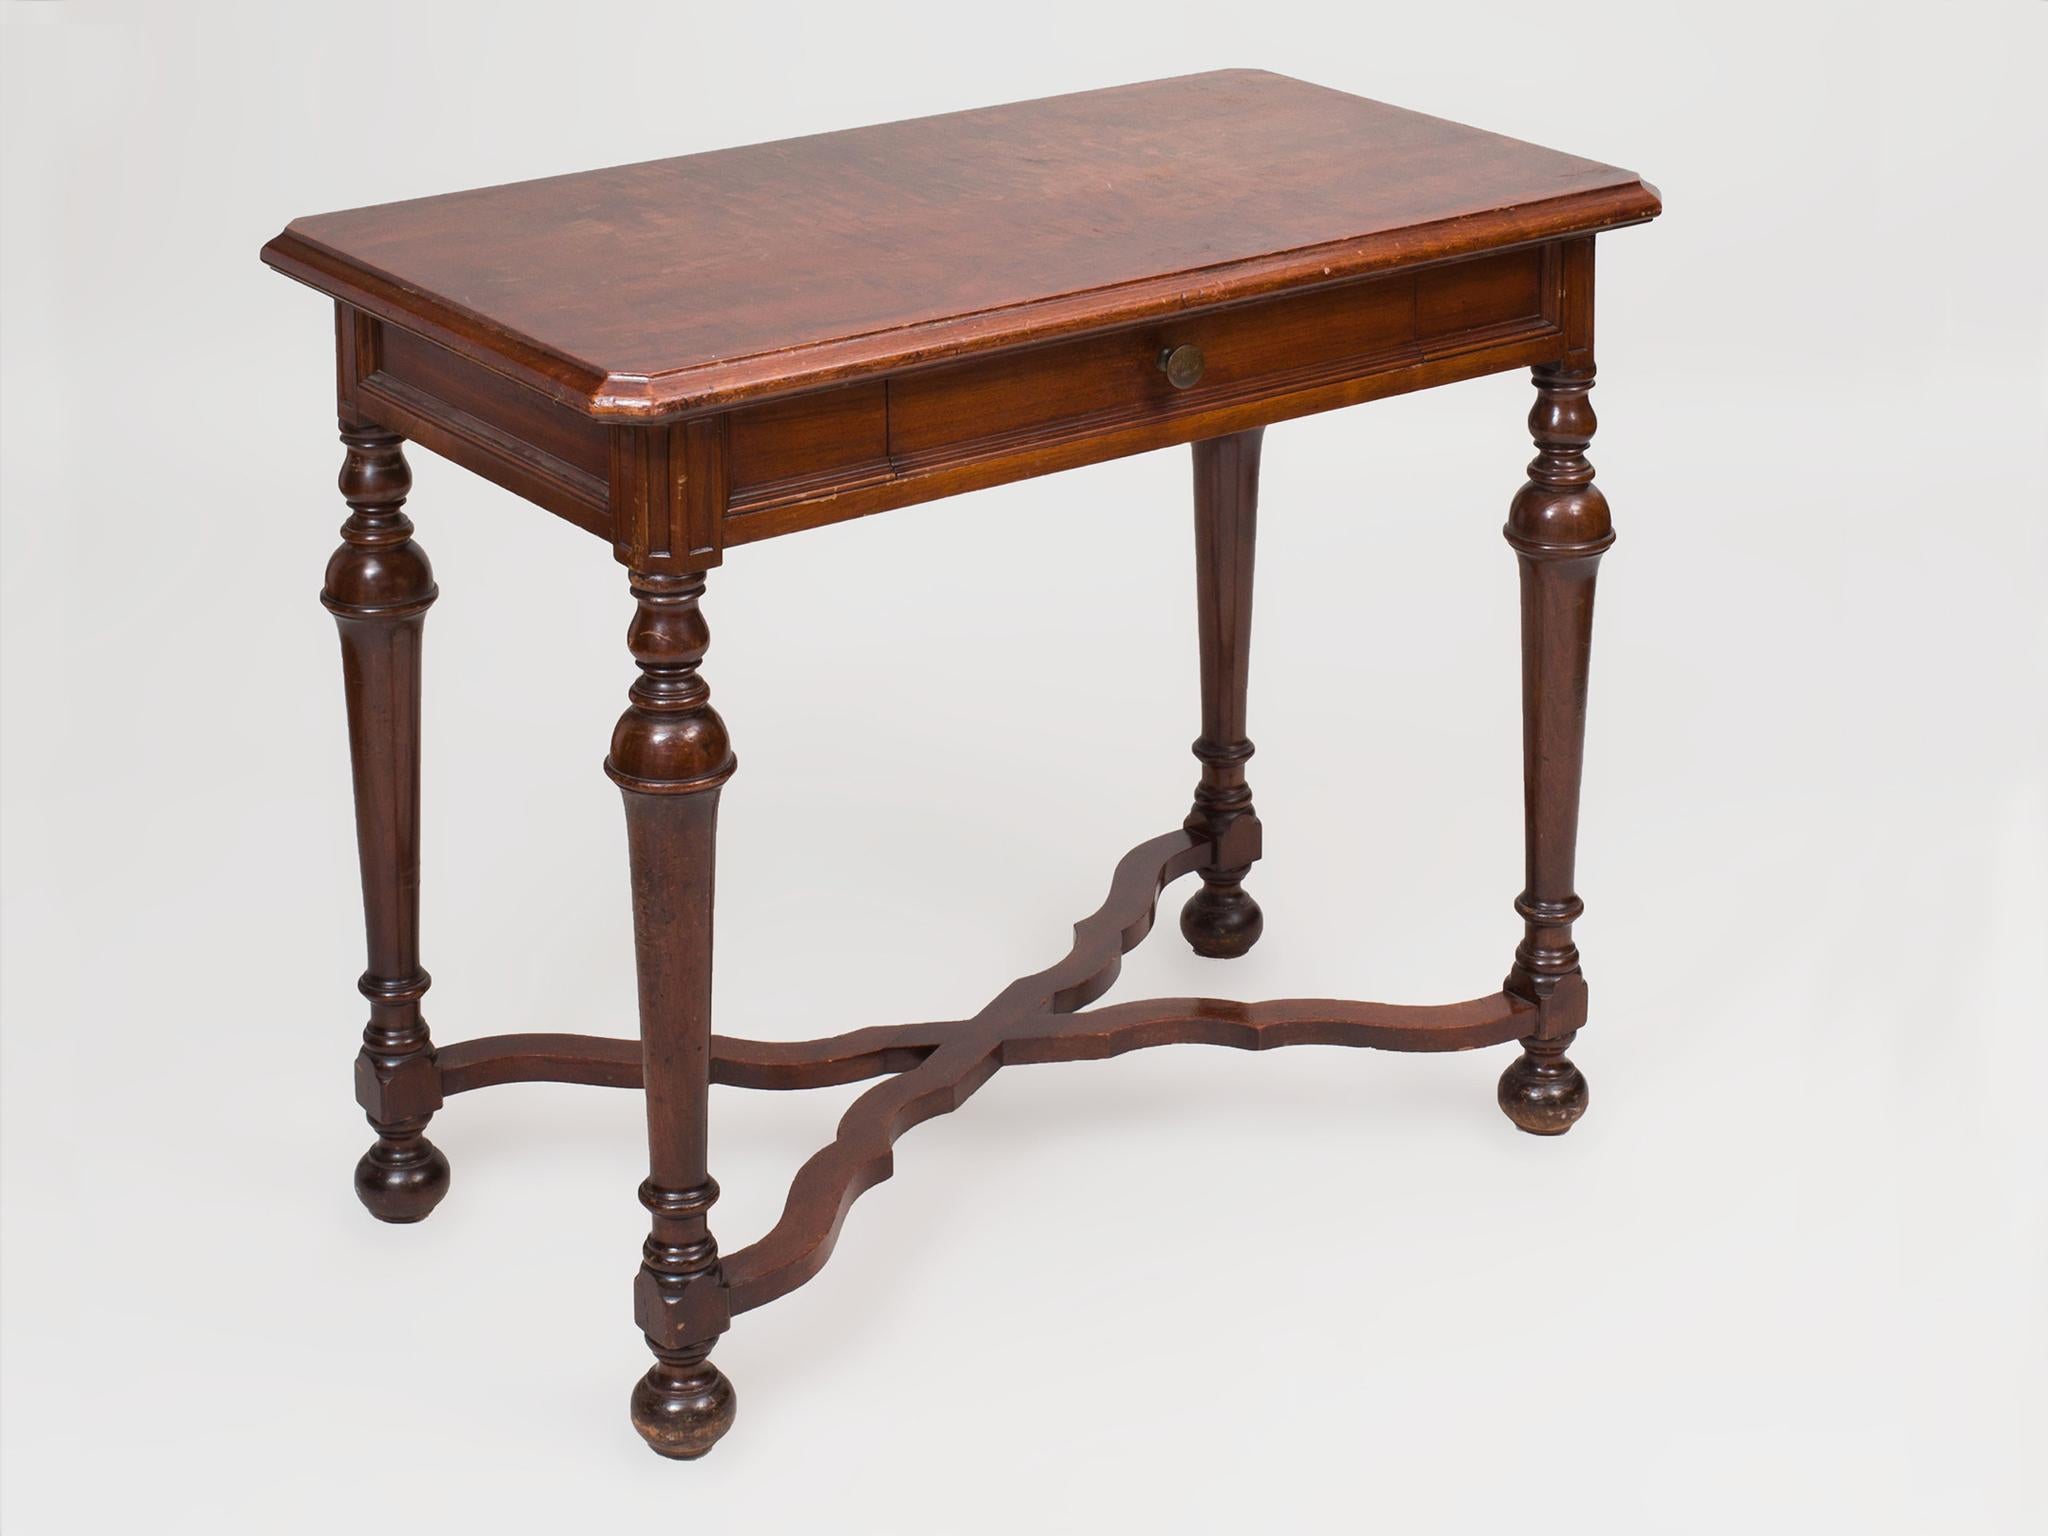 This Victorian style side table was designed and manufactured by the Doten-Dunton Desk Co., circa 1910s. It is comprised of mahogany with a warm, dark glaze finish. The design is elegant and simple: a beveled tabletop, beaded skirt with fitted